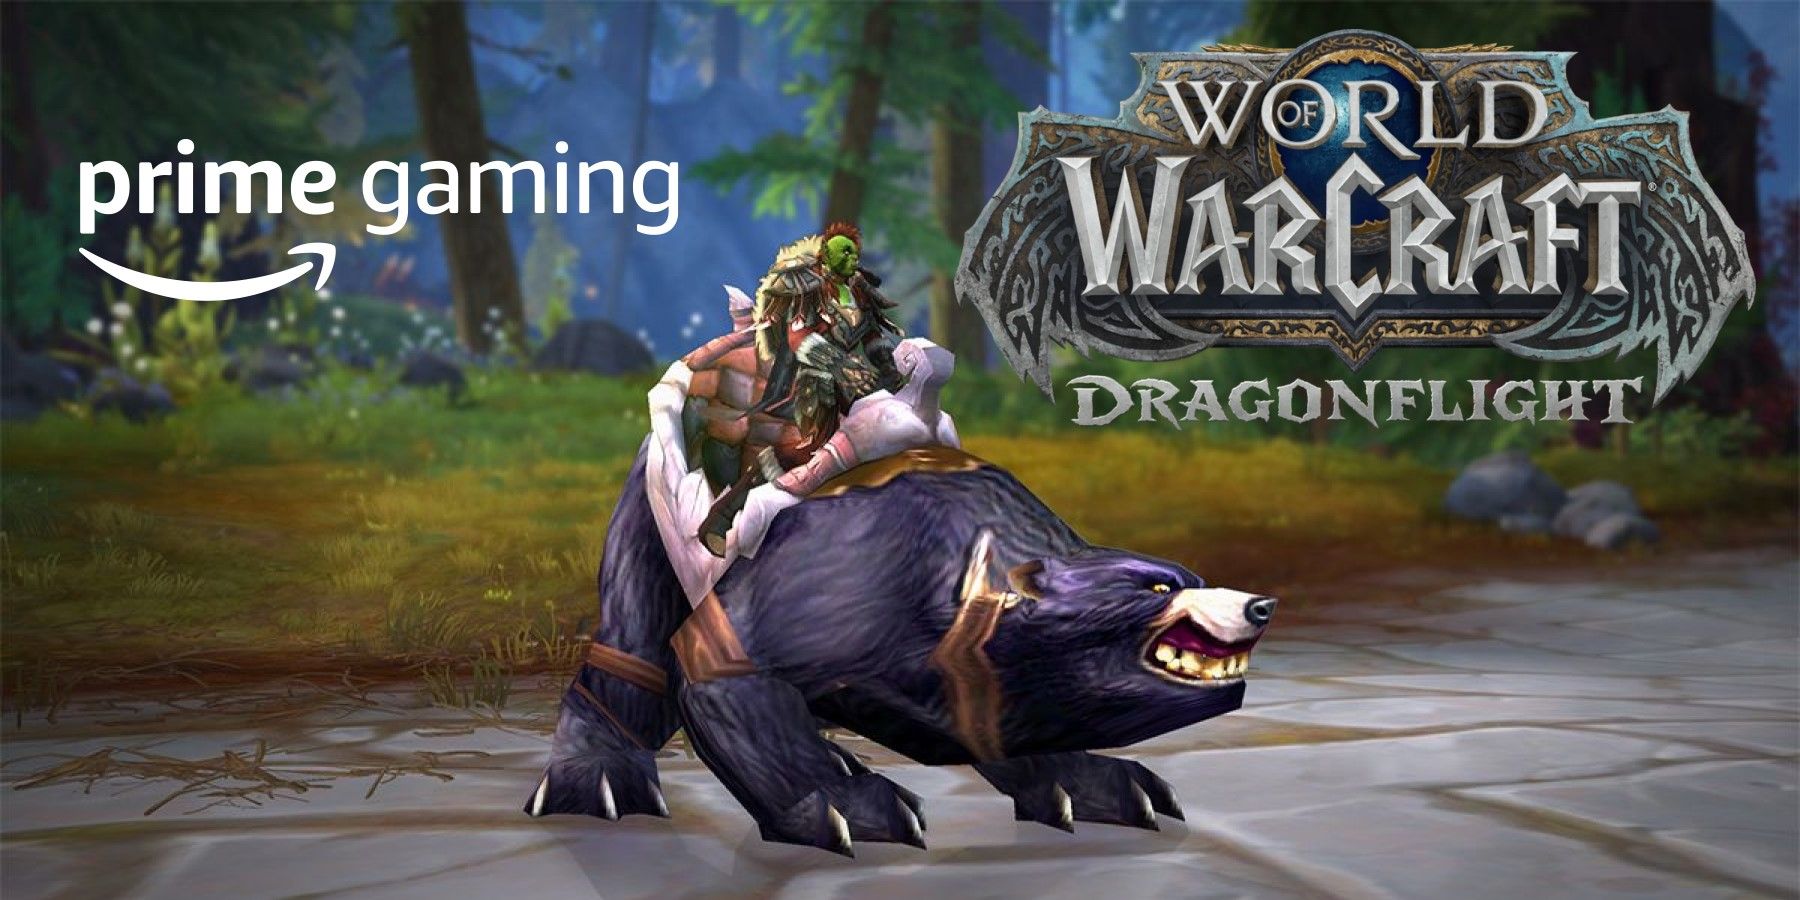 Prime Gaming July offerings include a World of Warcraft bonus